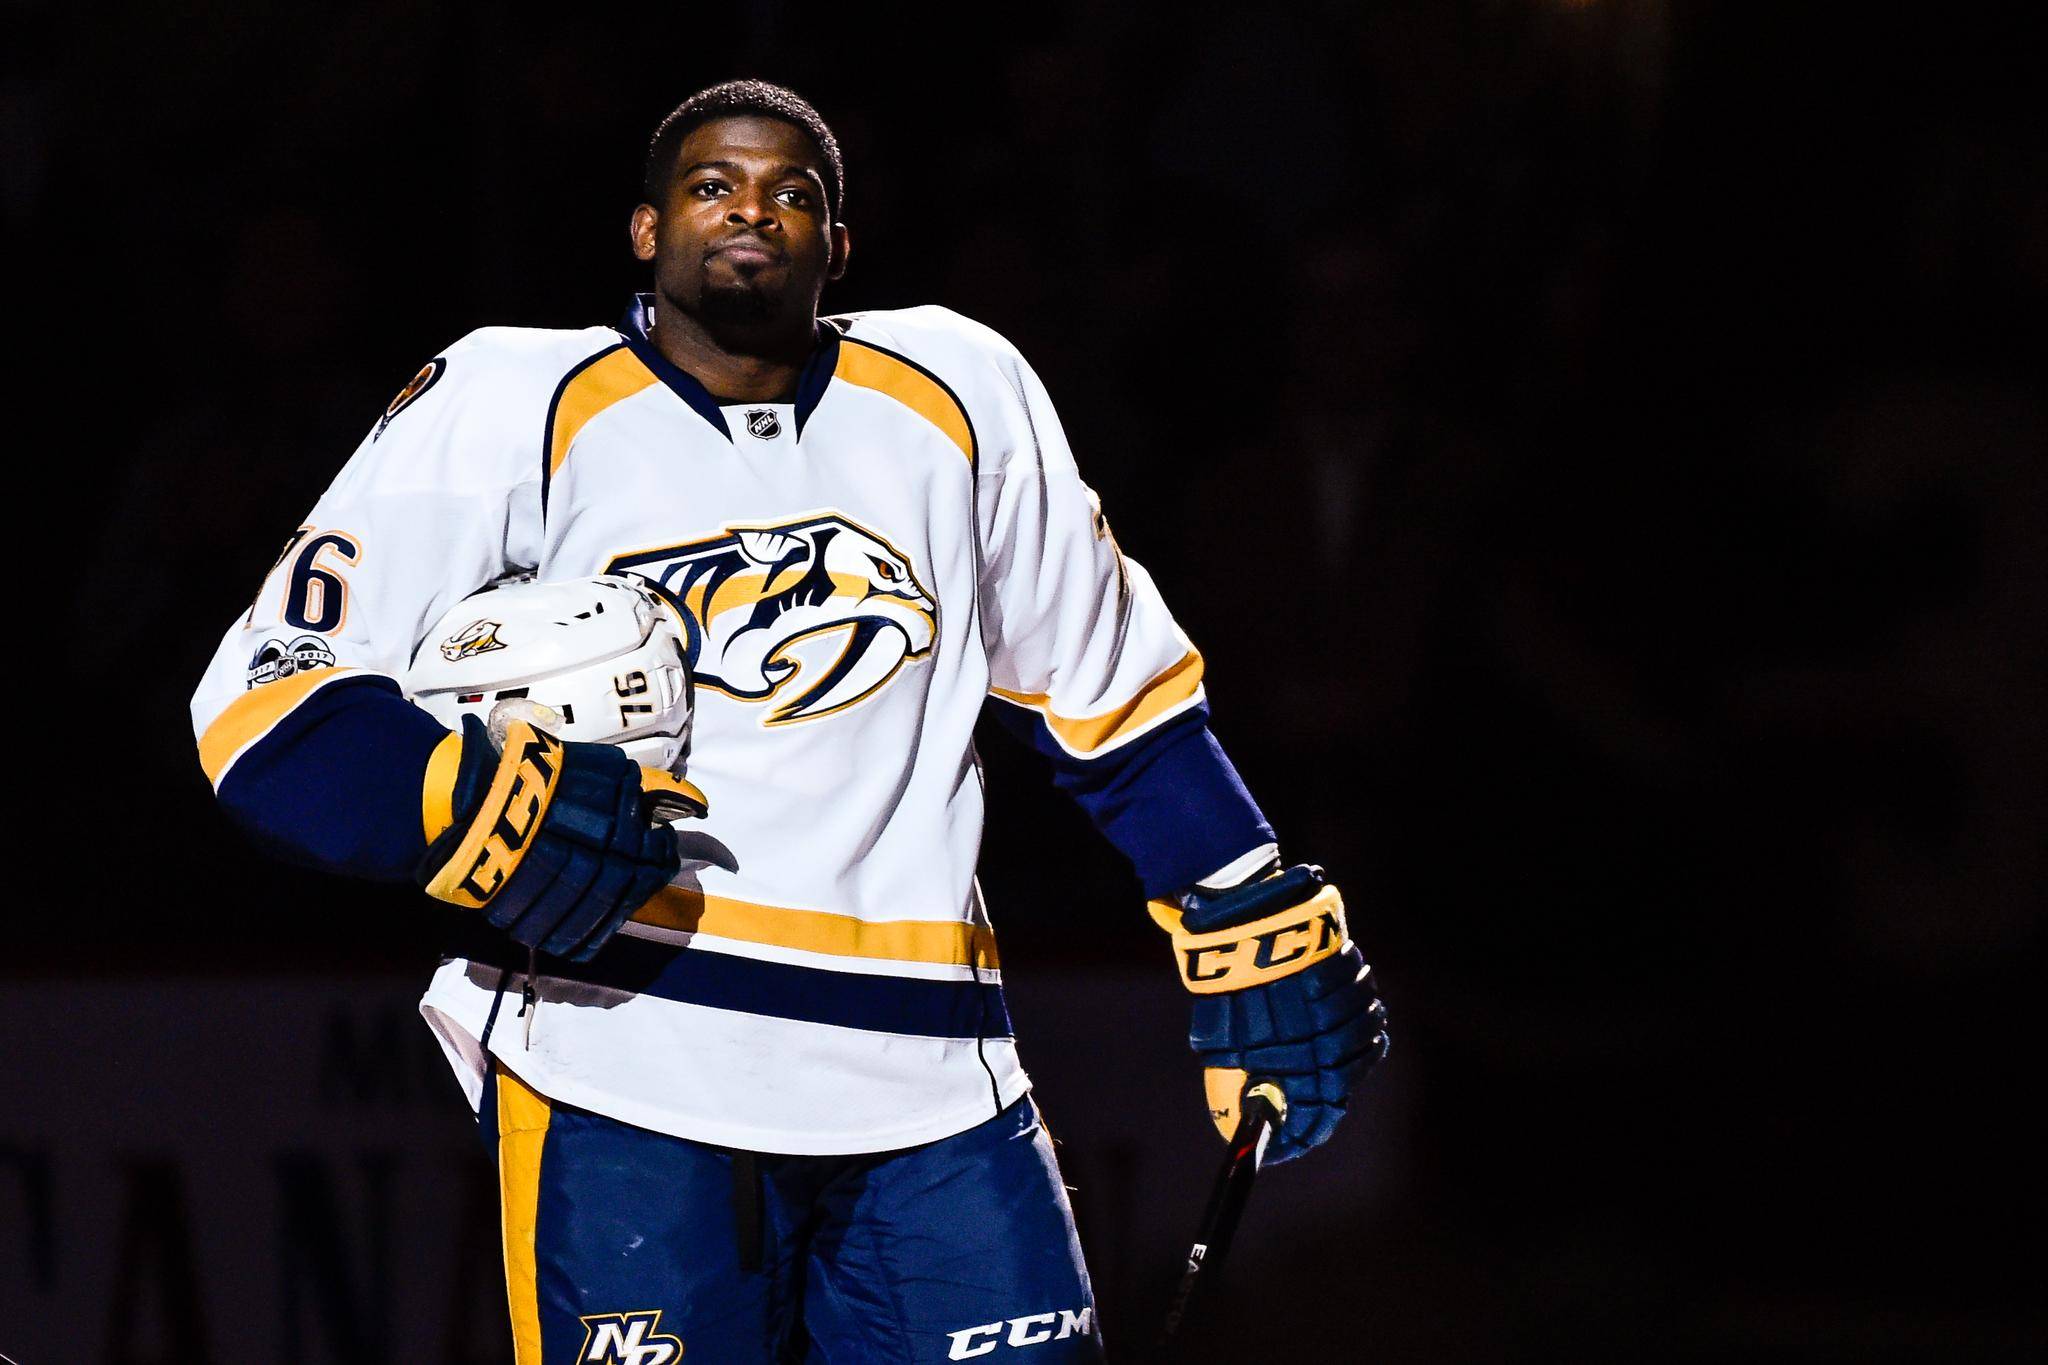 P.K. Subban on what Sidney Crosby said after Game 3: 'He told me